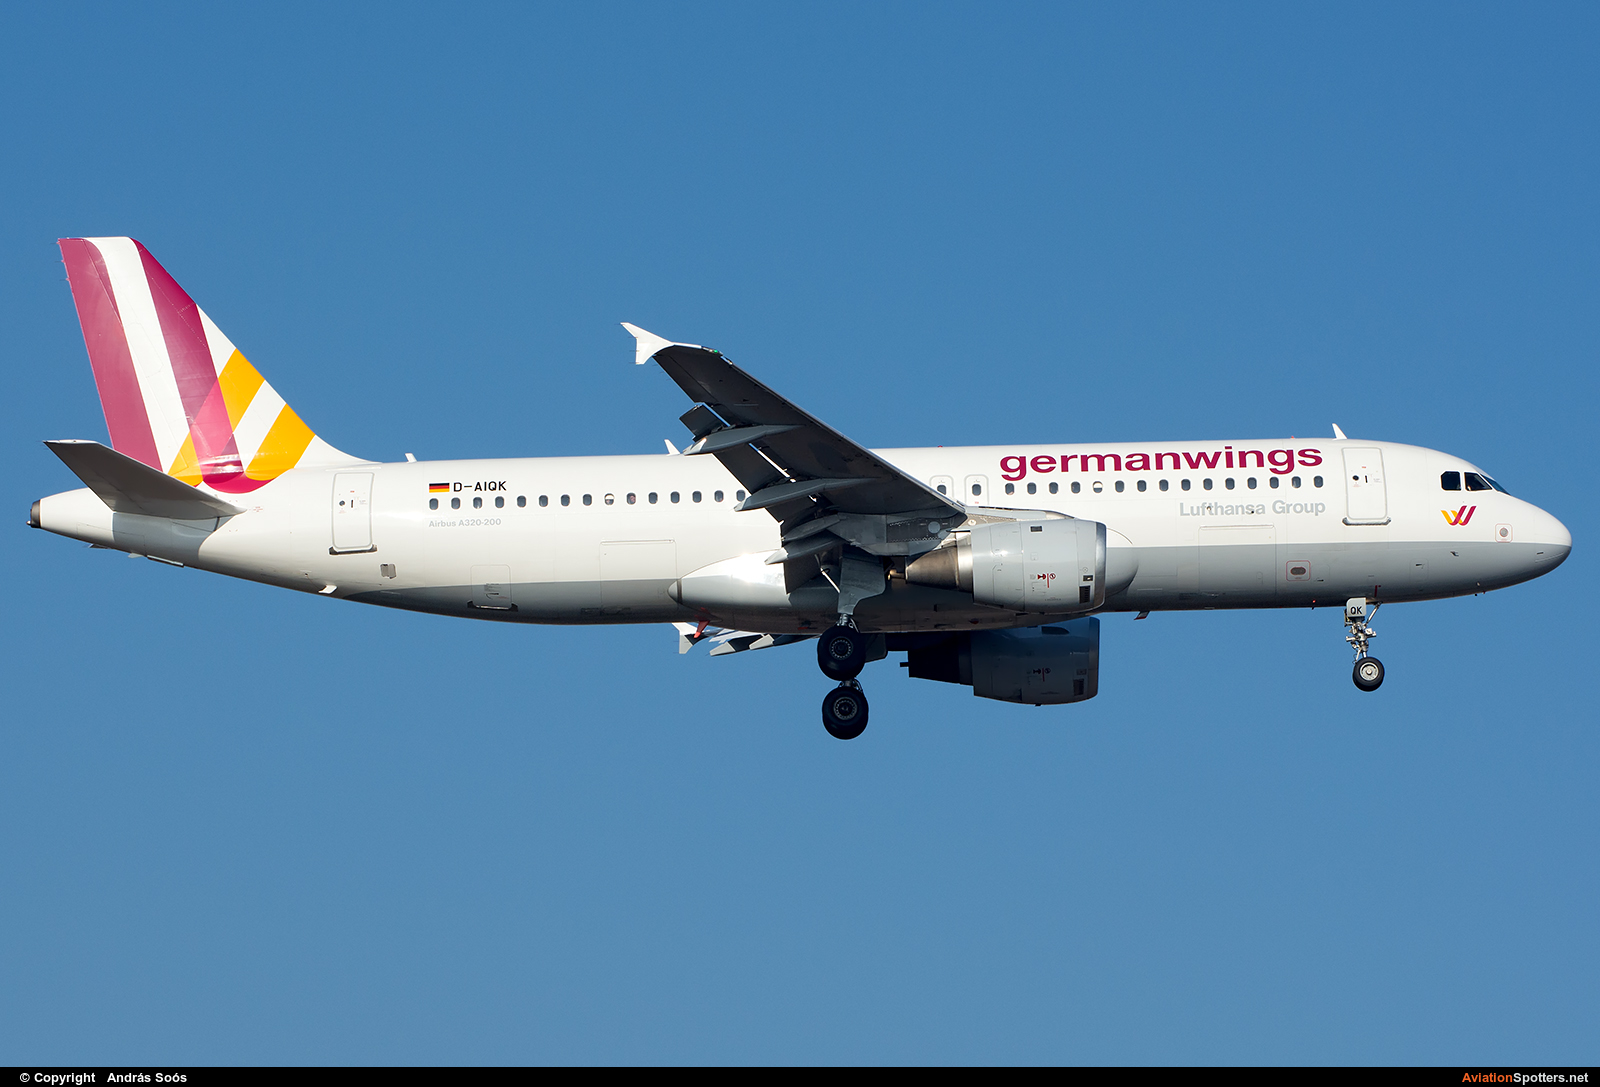 Germanwings  -  A320  (D-AIQK) By András Soós (sas1965)